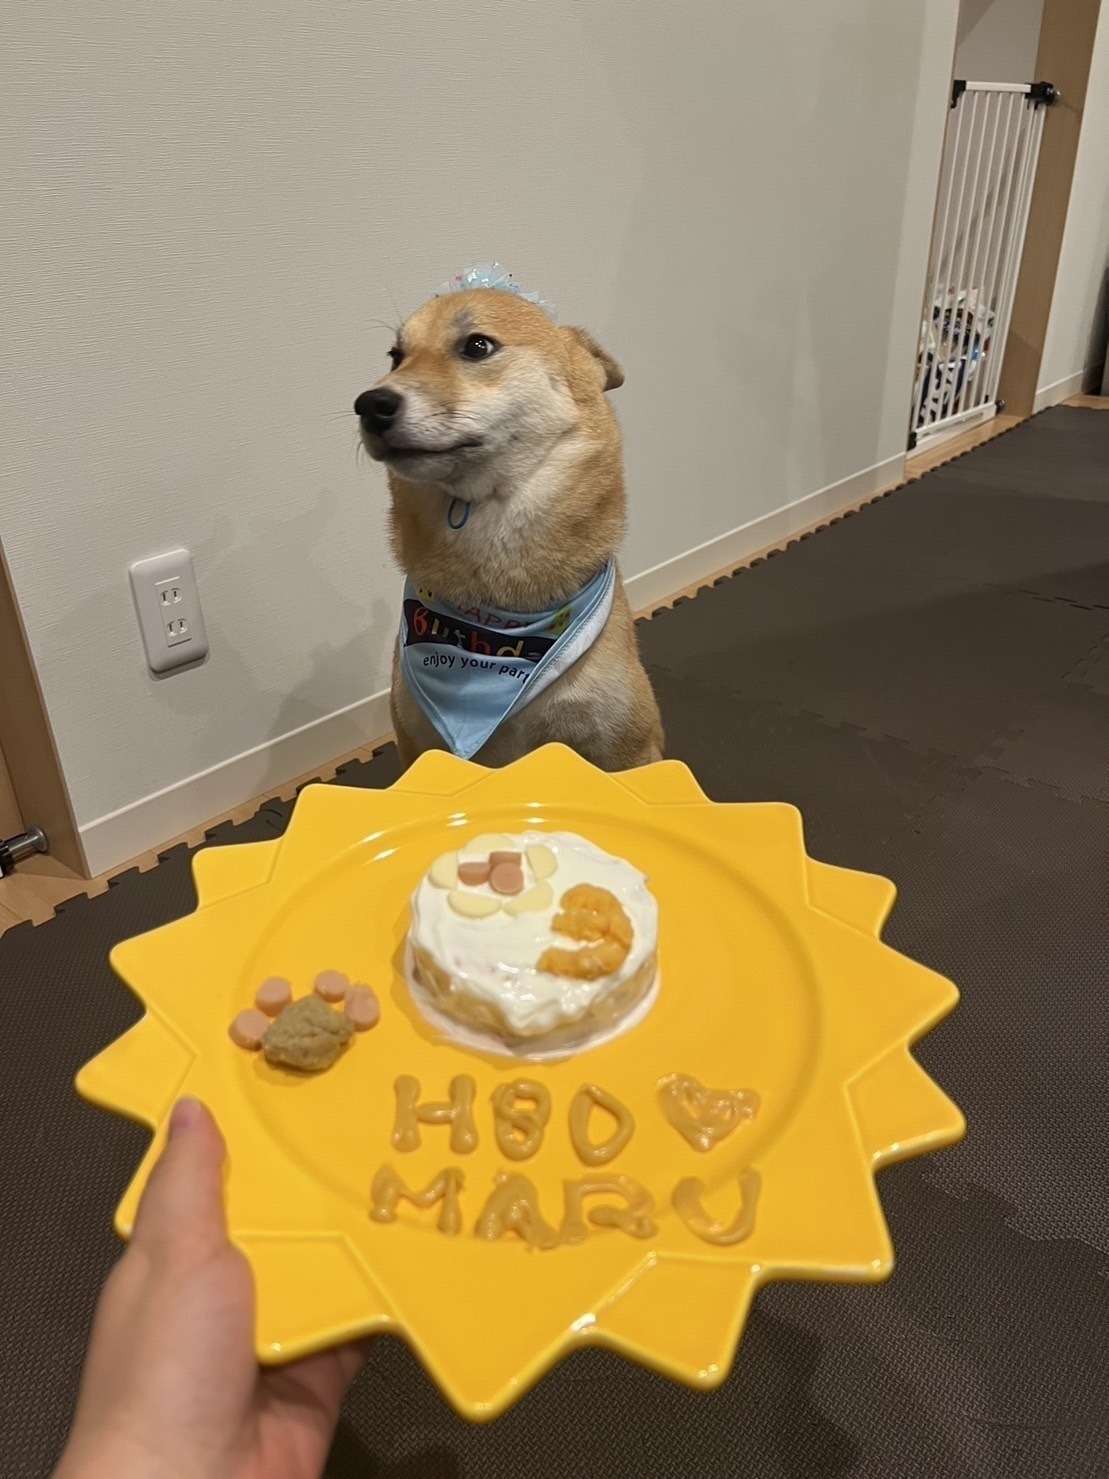 Dog waiting on person handing him a special birthday meal on a yellow plate. 